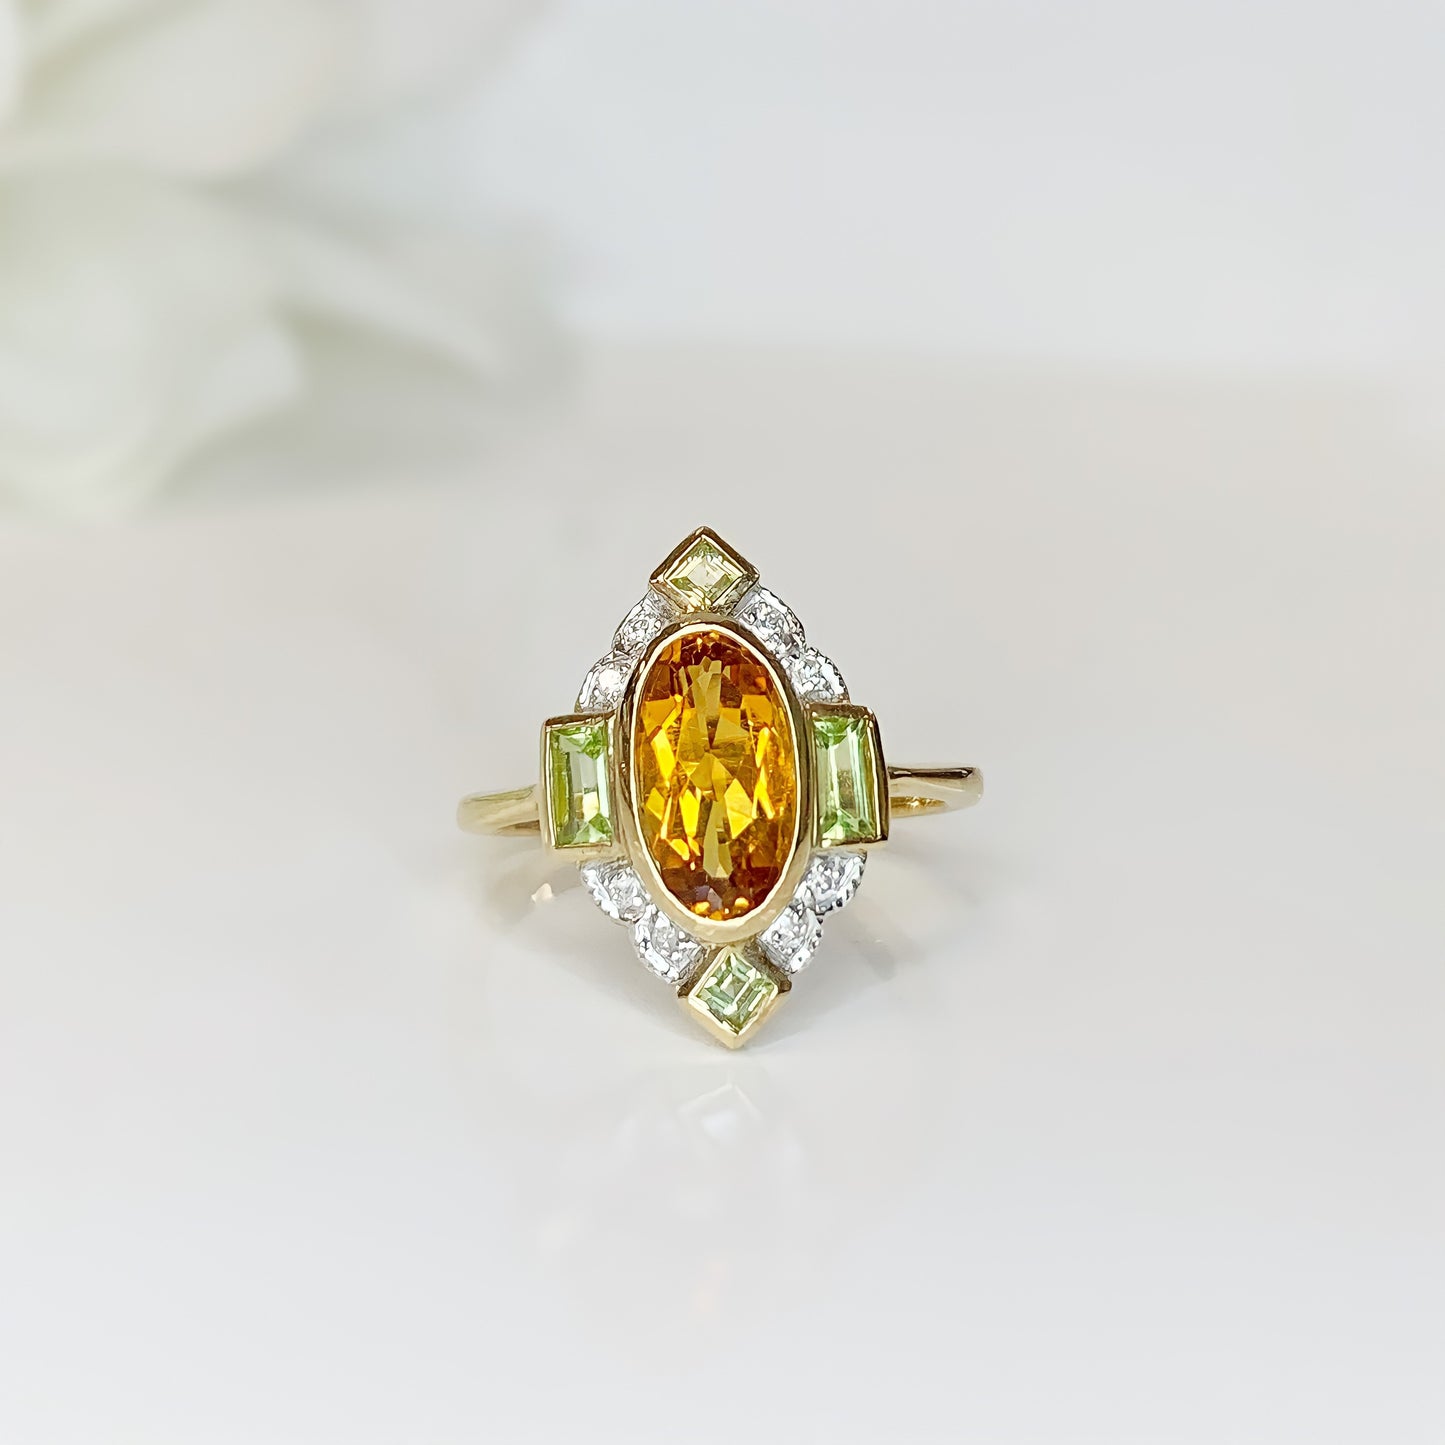 Art Deco Inspired 9ct Yellow Gold Citrine, Peridot and Diamond Ring - Size L 1/2